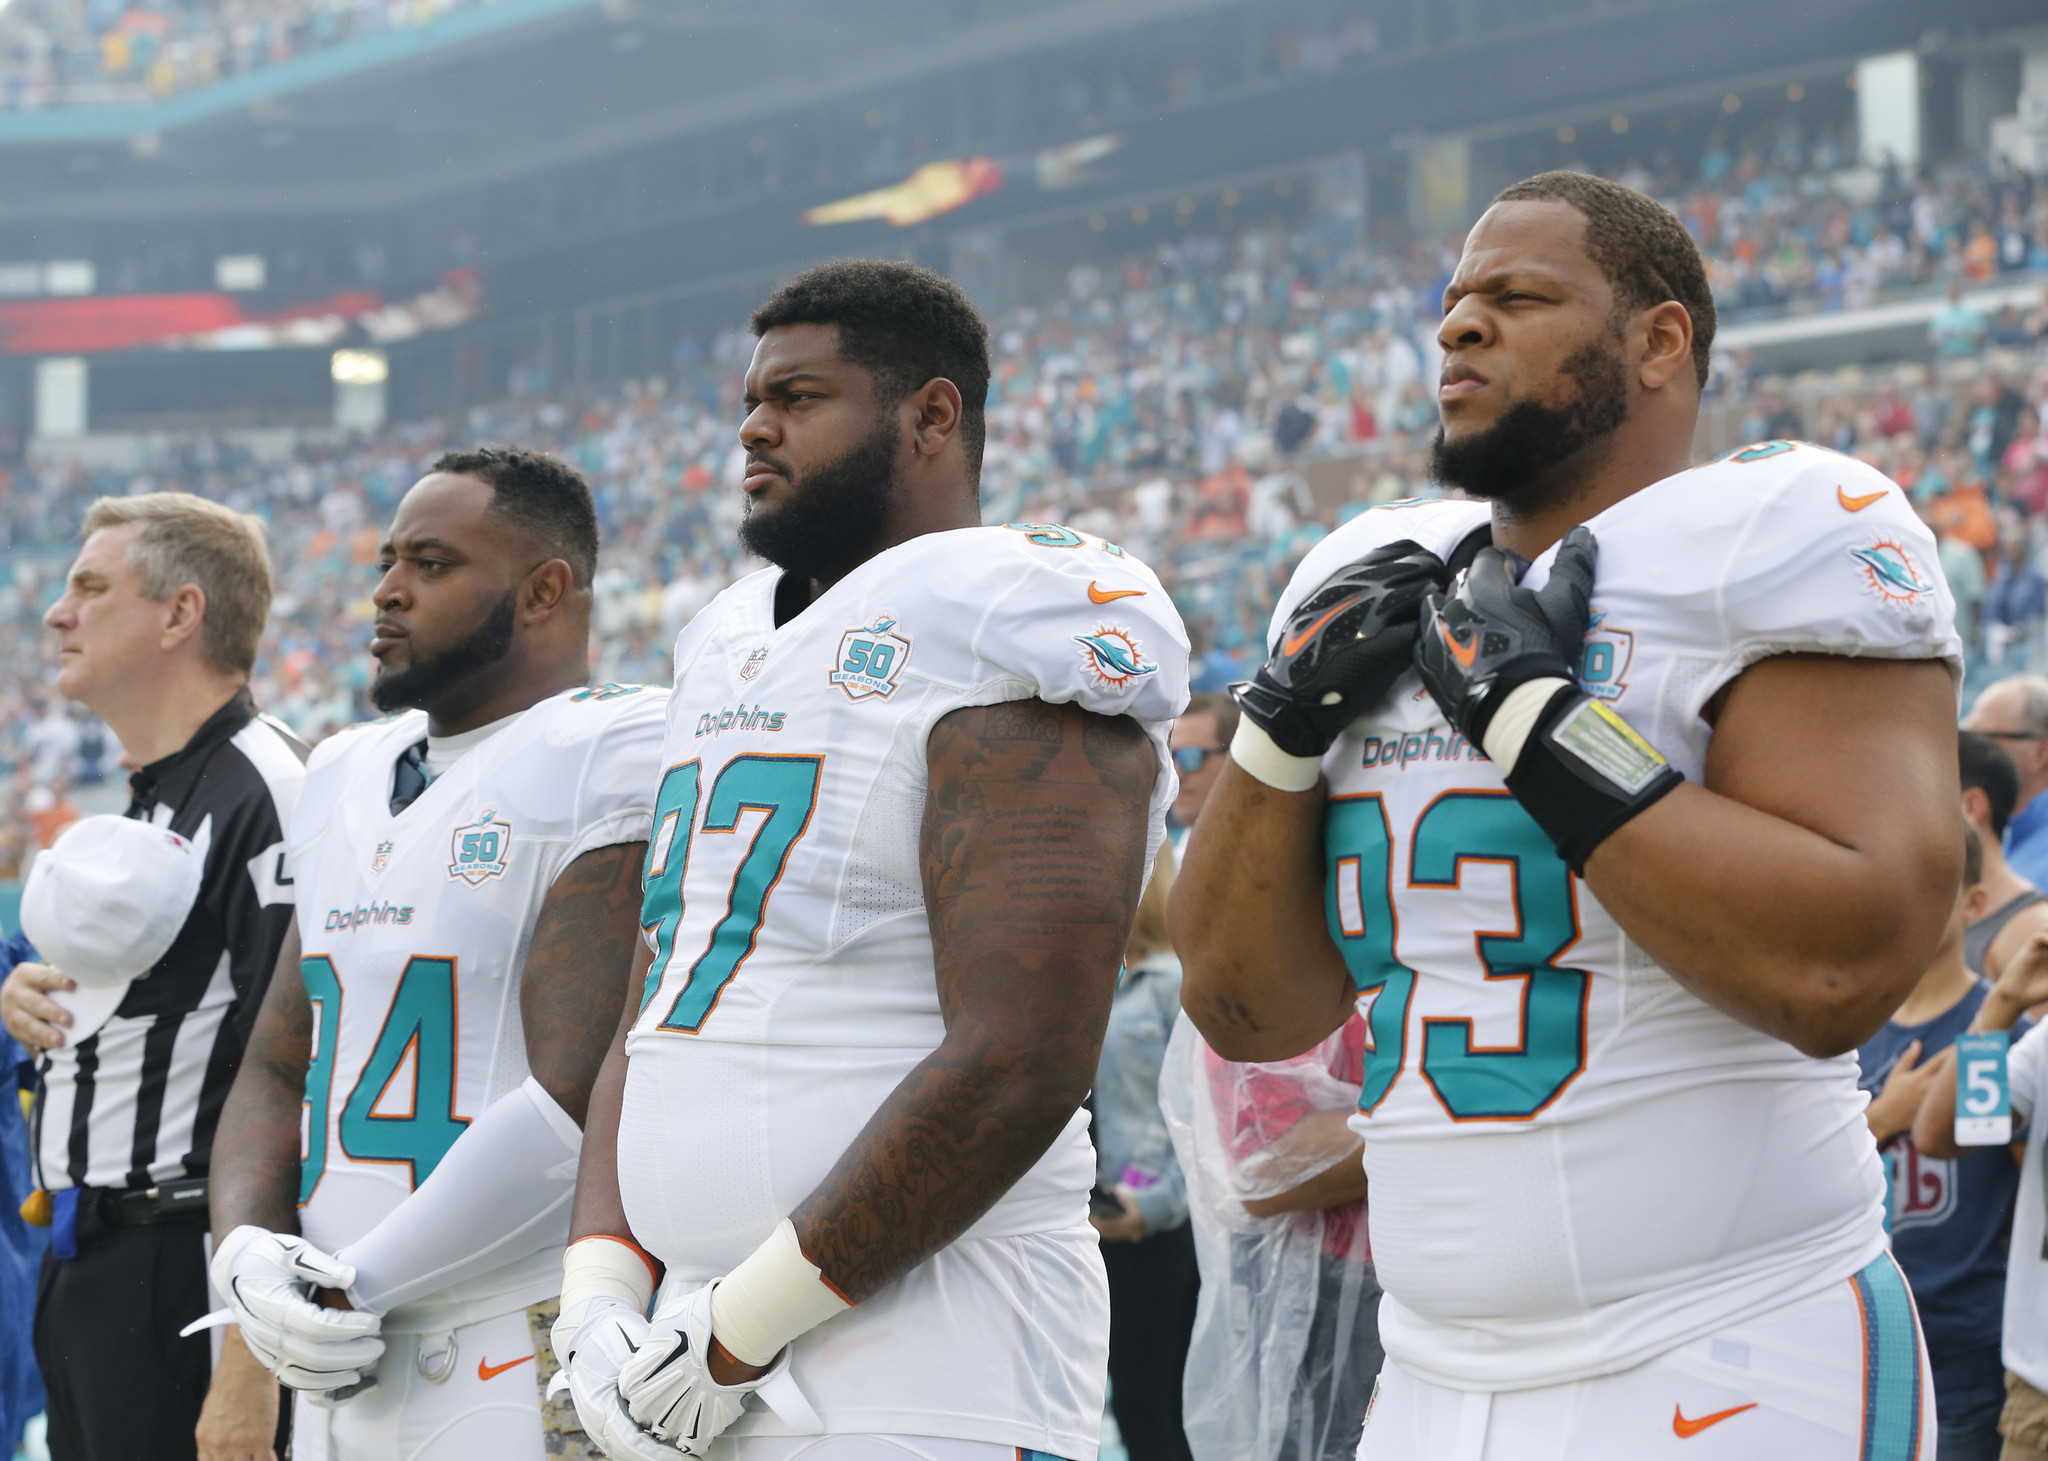 Defensive Tackle is a tough spot for the 2017 Dolphins - close to being filled, but not close enough.